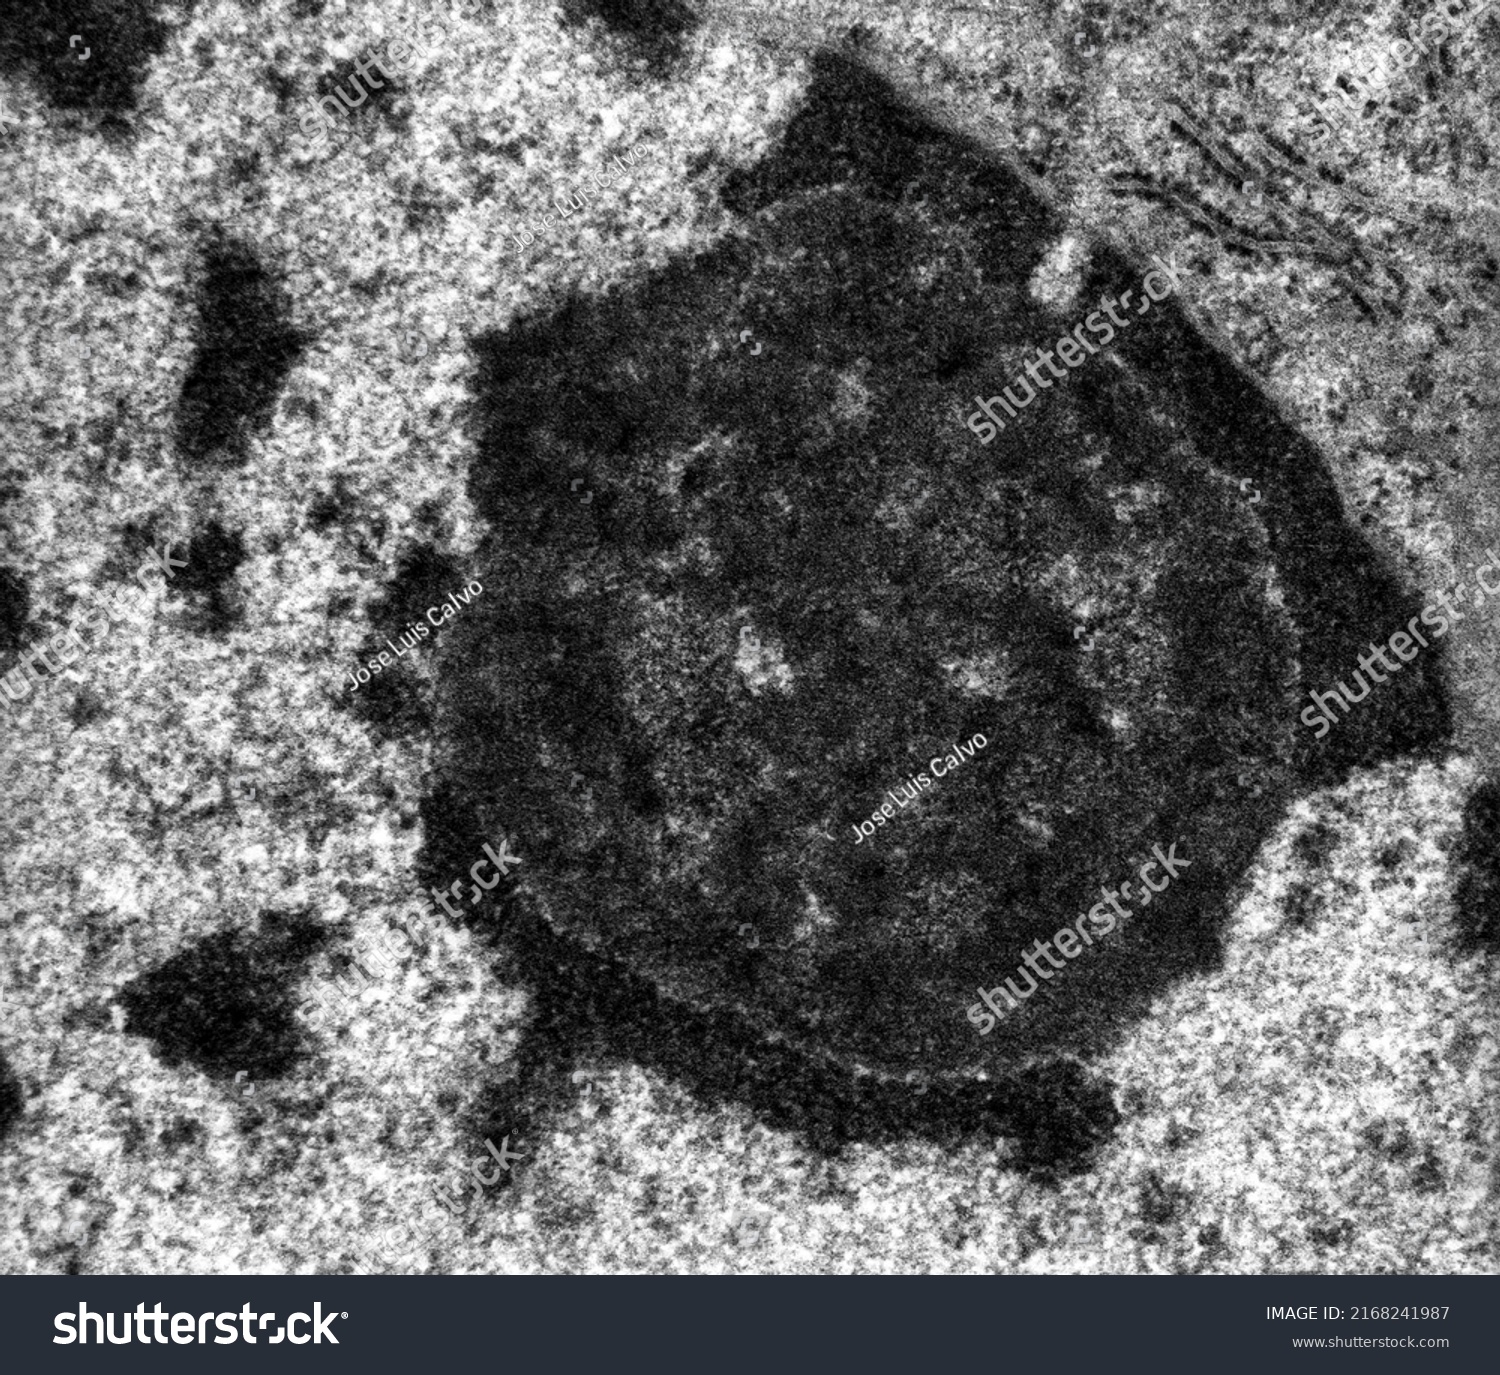 High Magnification Tem Micrograph Showing Nucleolus Stock Photo ...